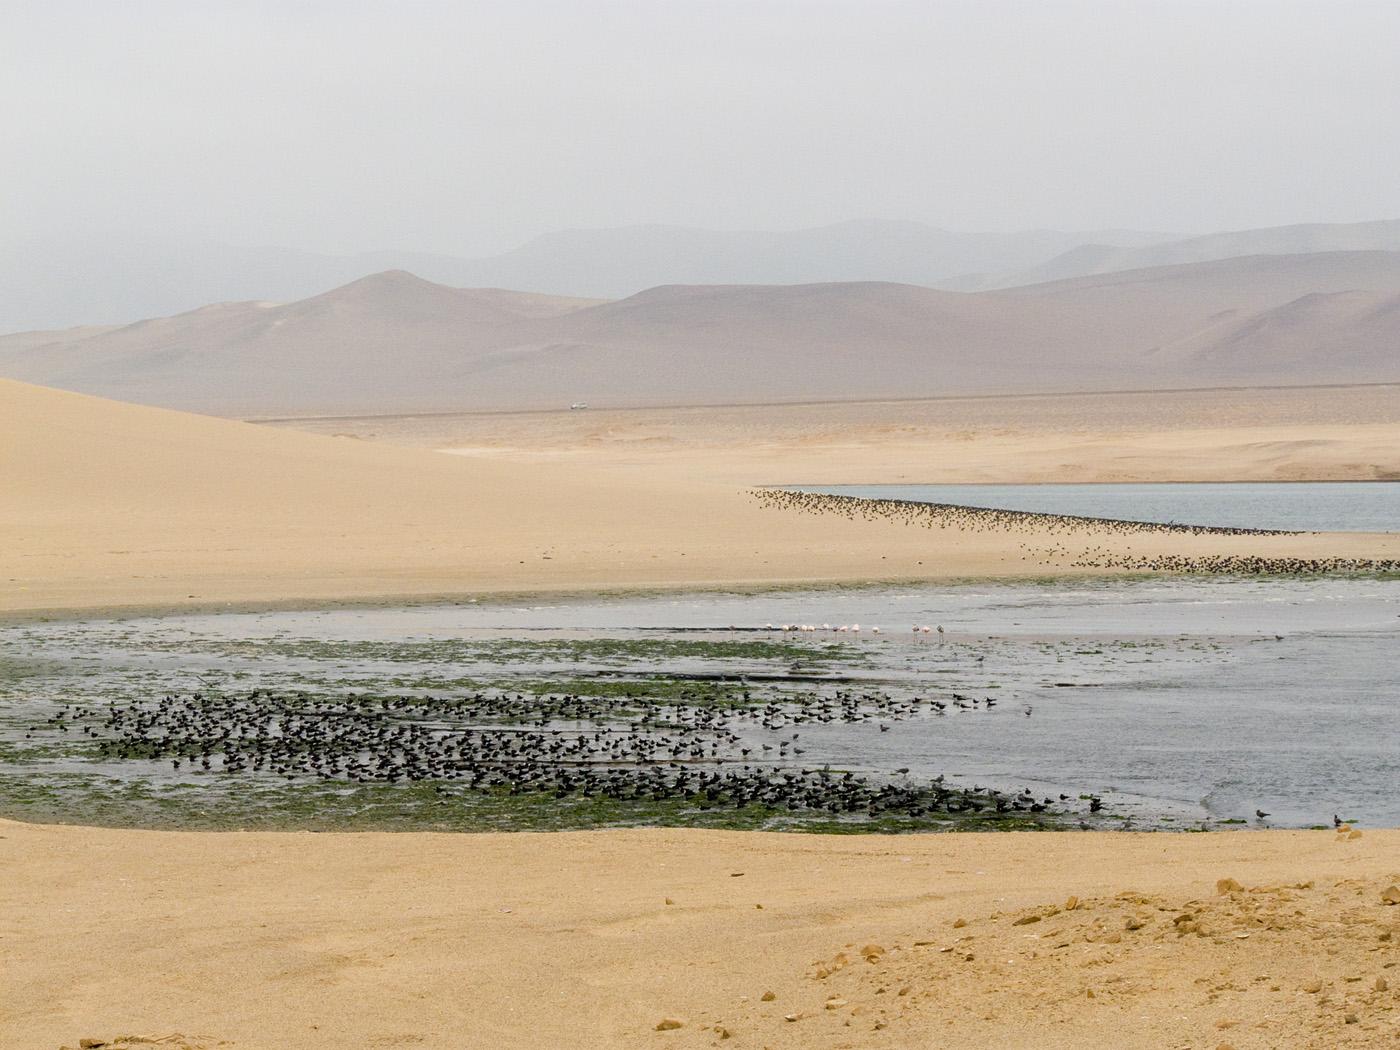 Black Skimmers and Flamingoes, Paracas National Reserve